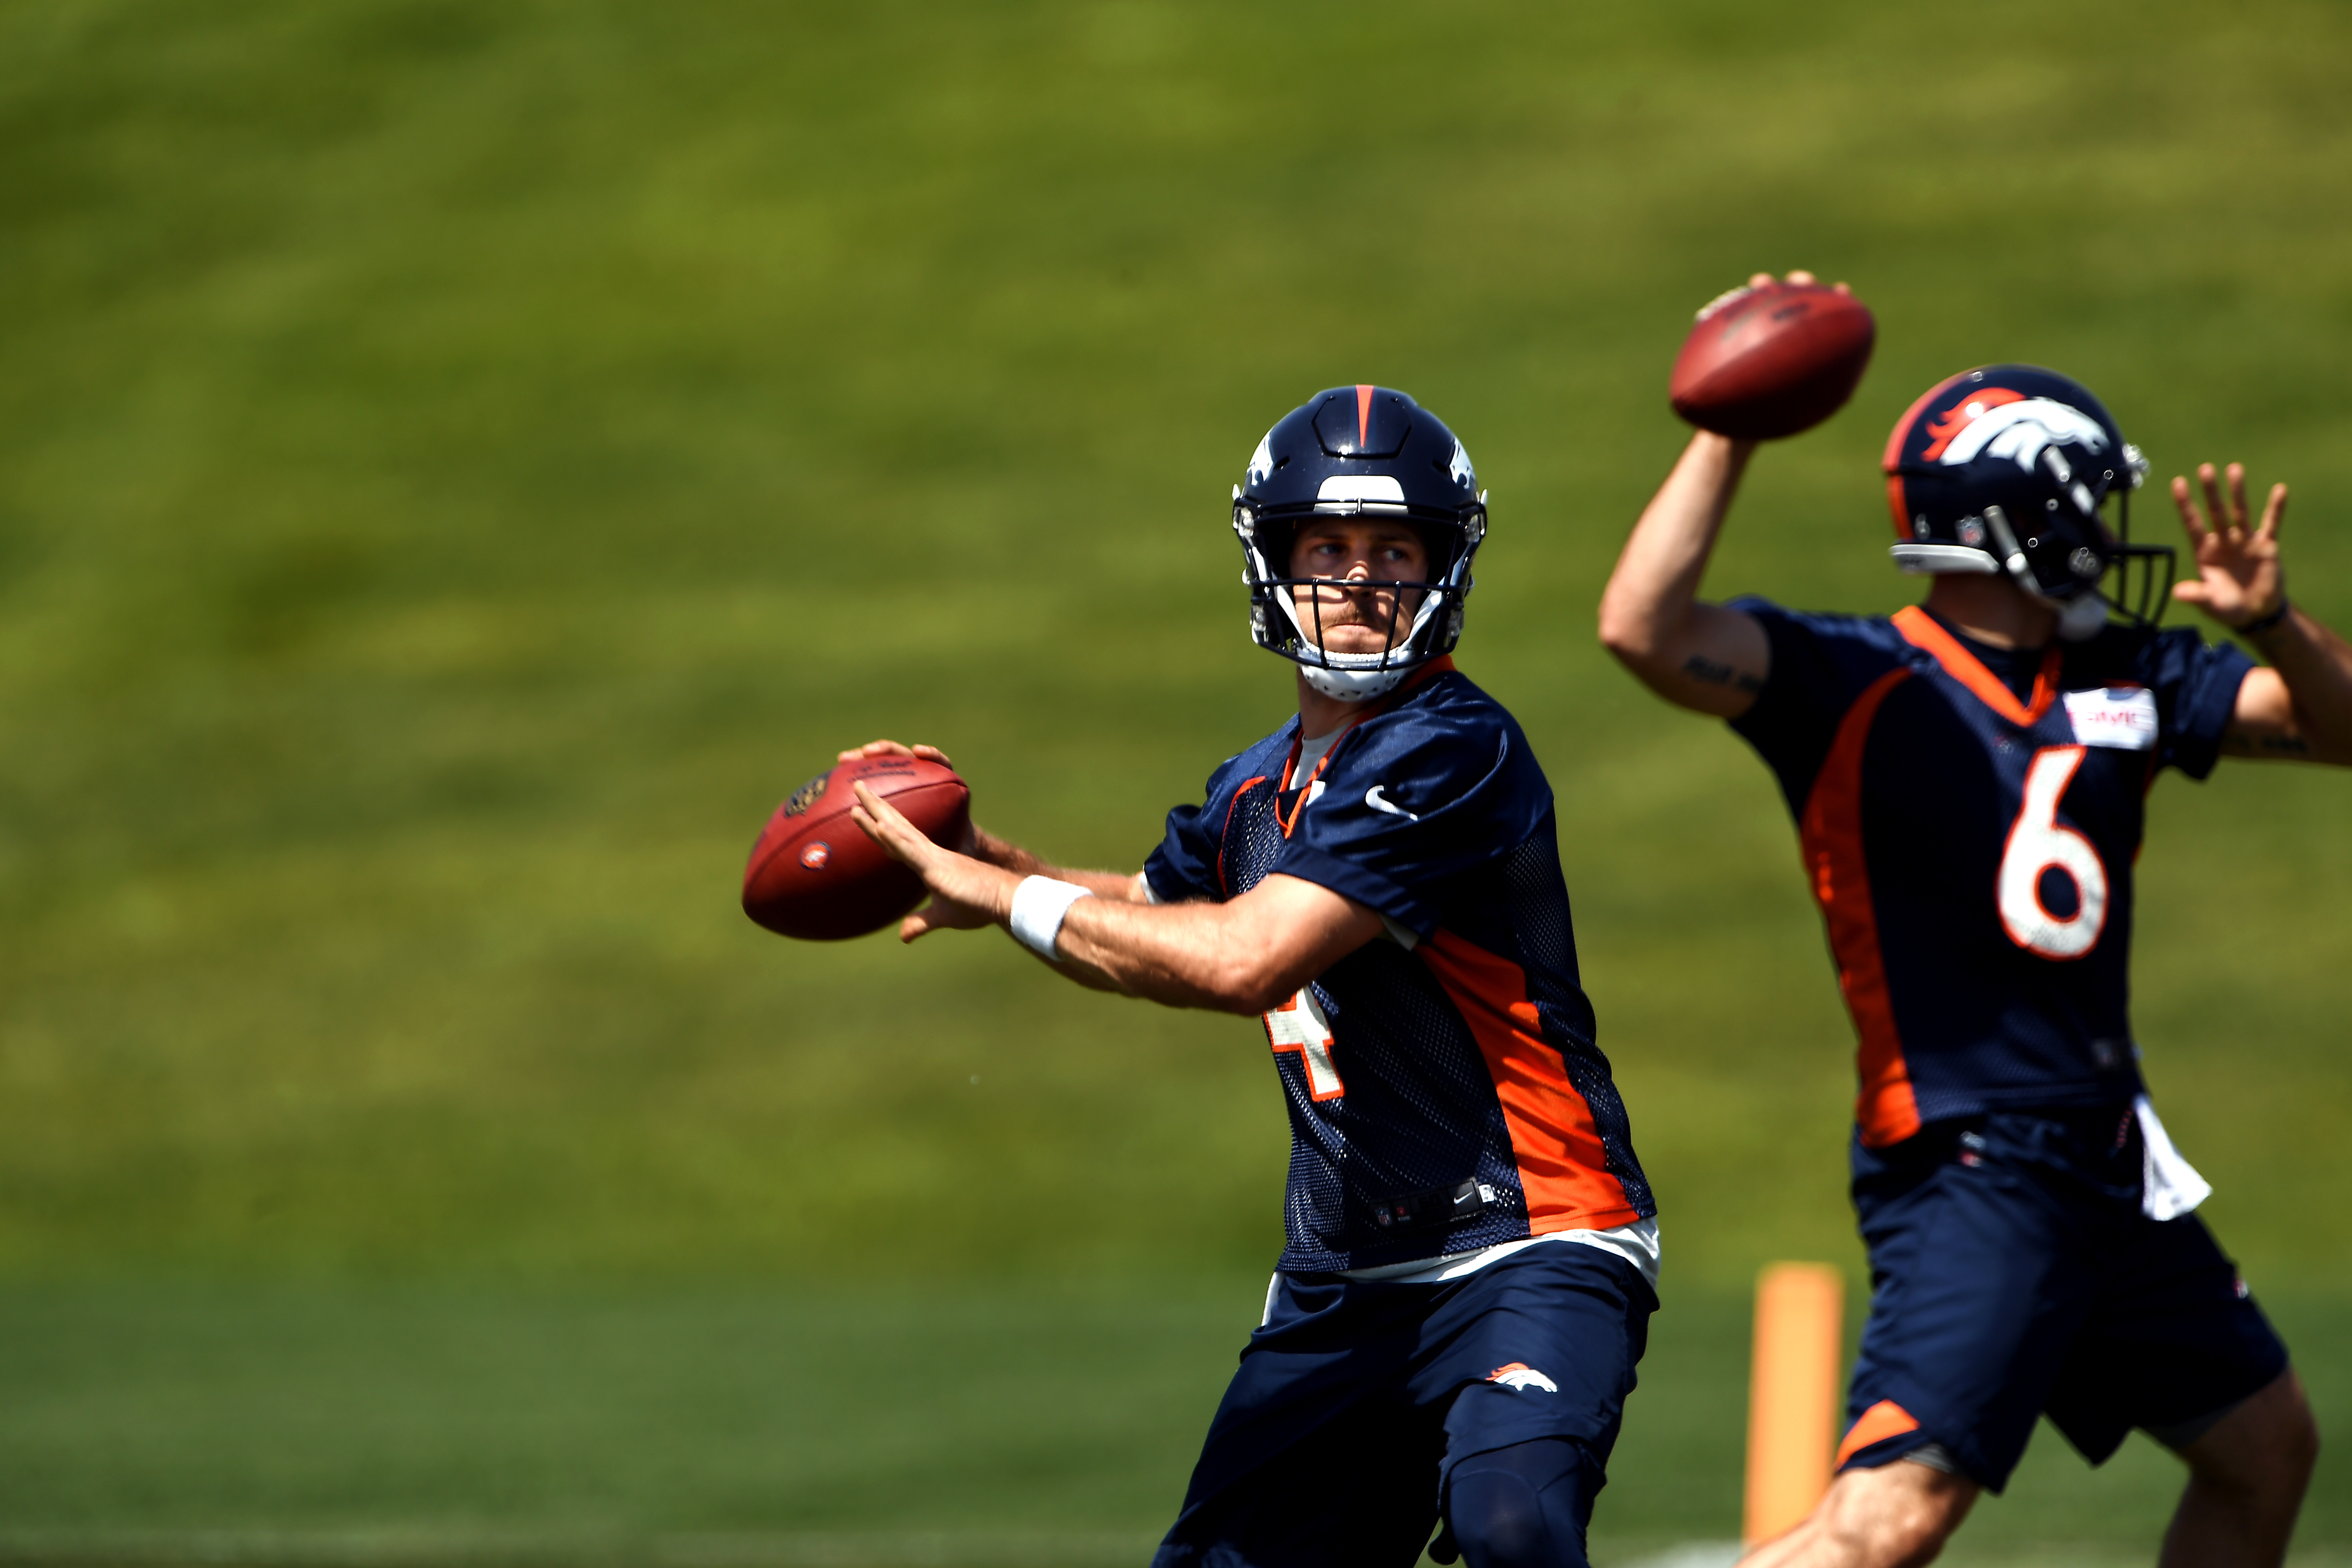 Pritchard: Broncos need a QB who improves, not just one to develop